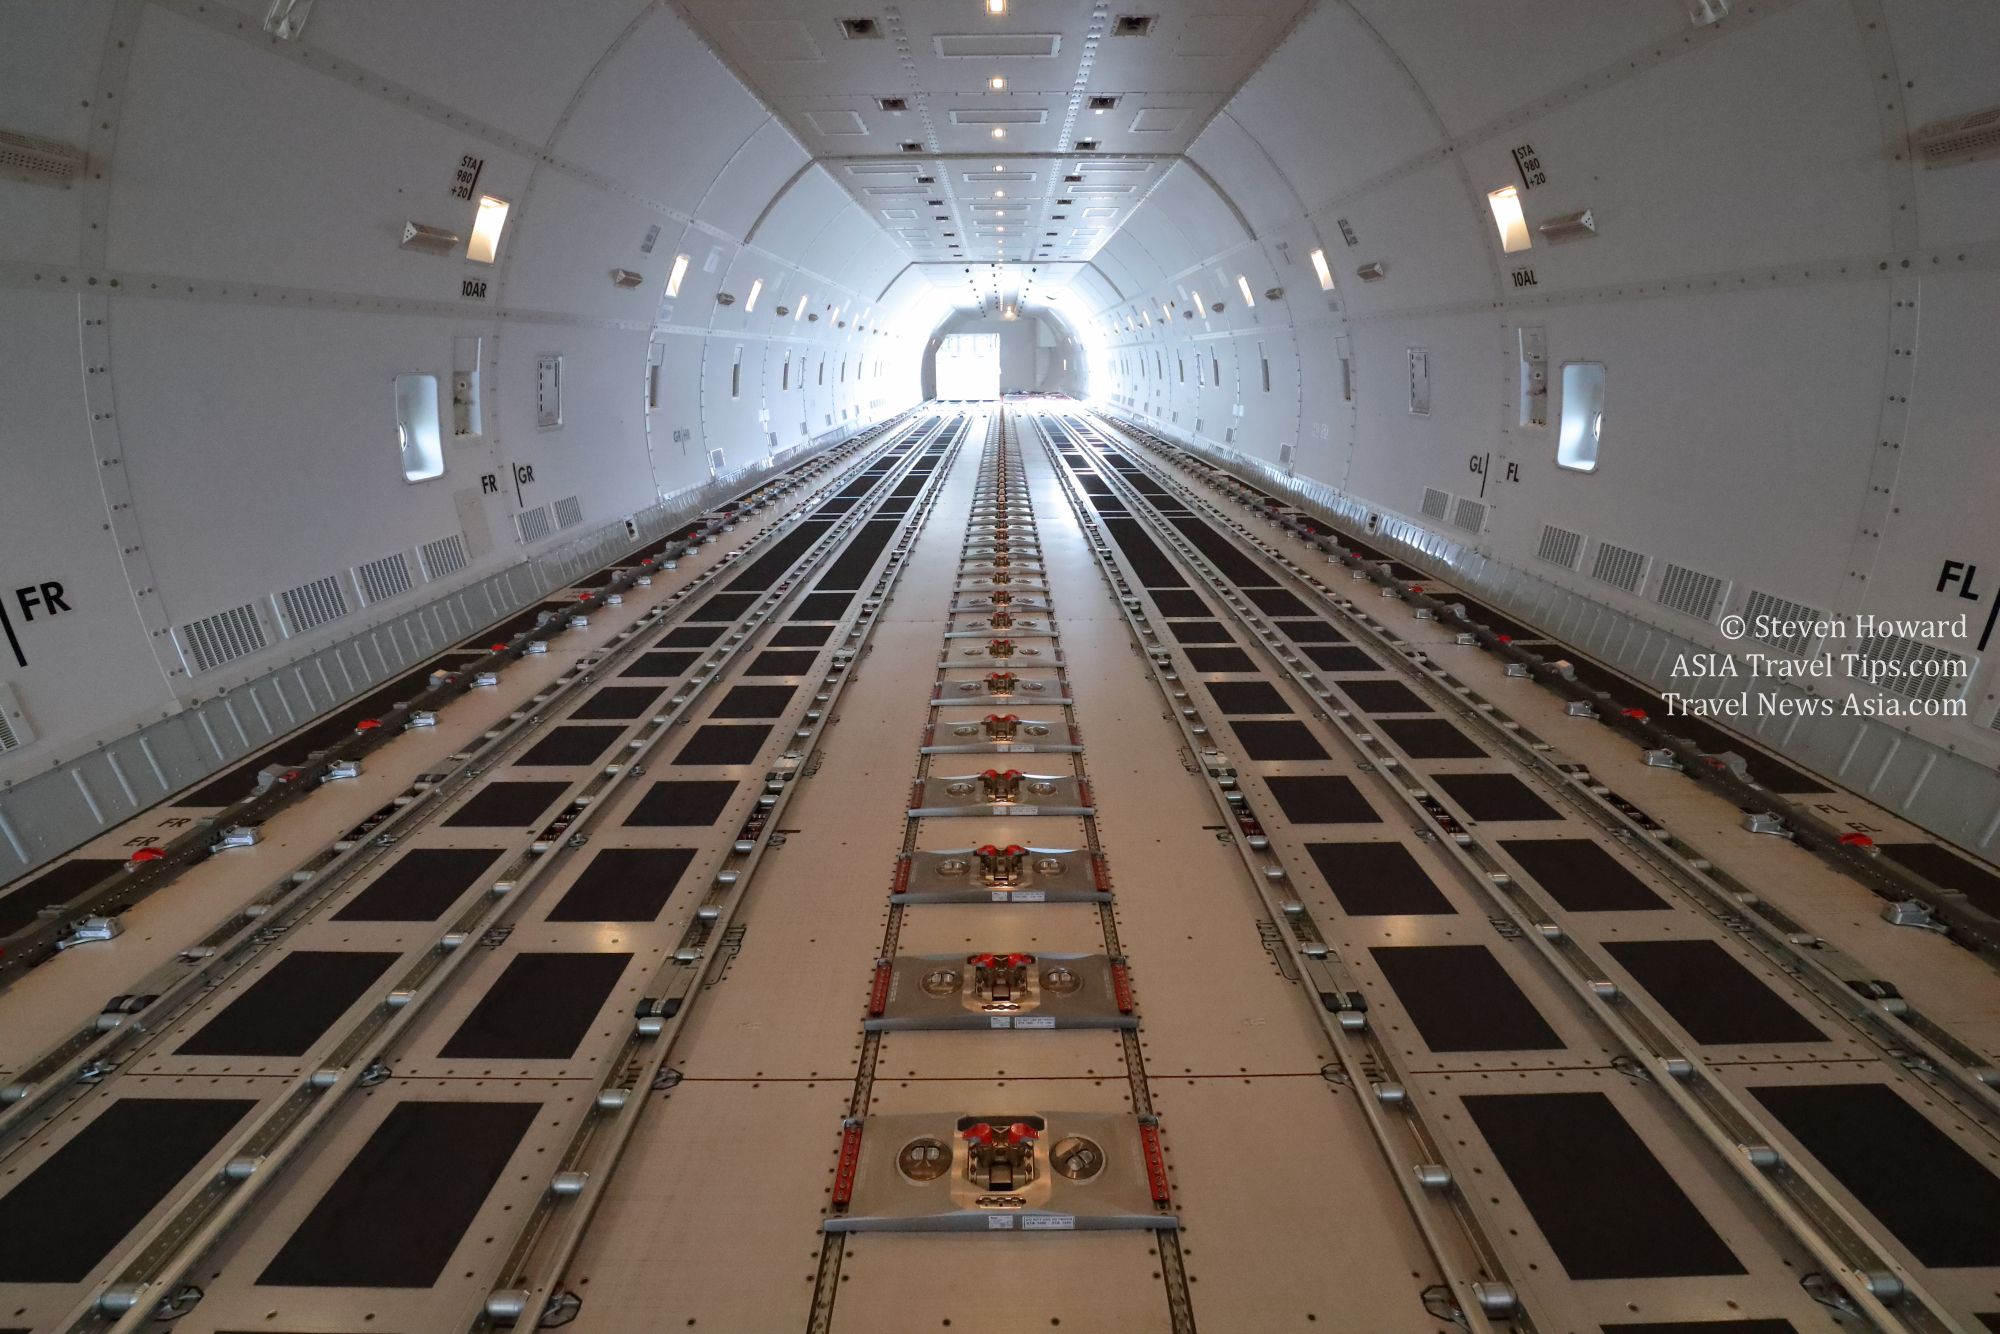 Inside a Qatar Airways Cargo Boeing 747F. Picture by Steven Howard of TravelNewsAsia.com Click to enlarge.